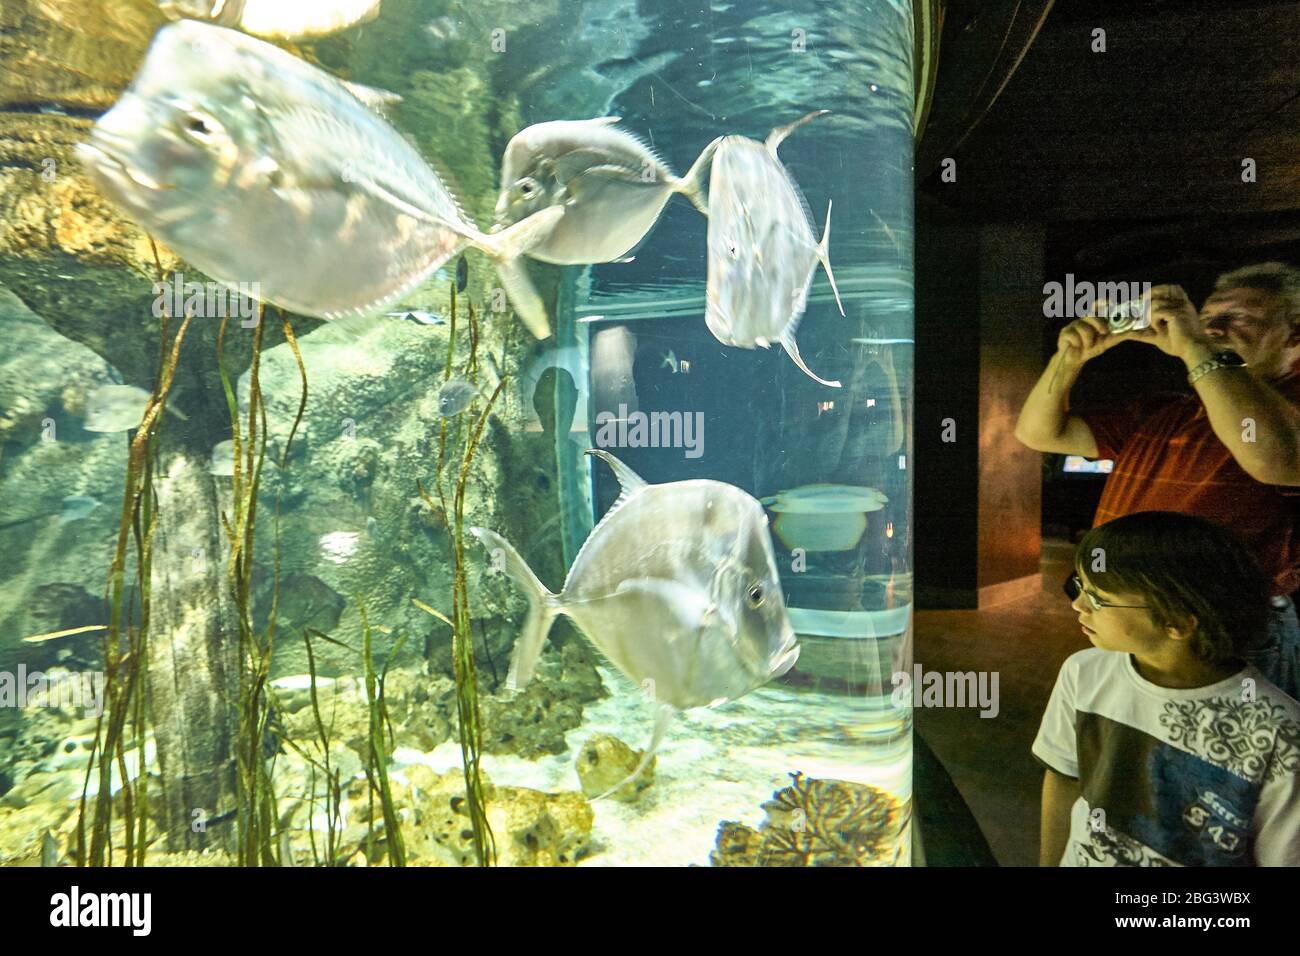 Visitors of the Hagenbeck Zoo in Hamburg oberserve the fishes in  a big aquarium. One of the fishes returns the view. Stock Photo